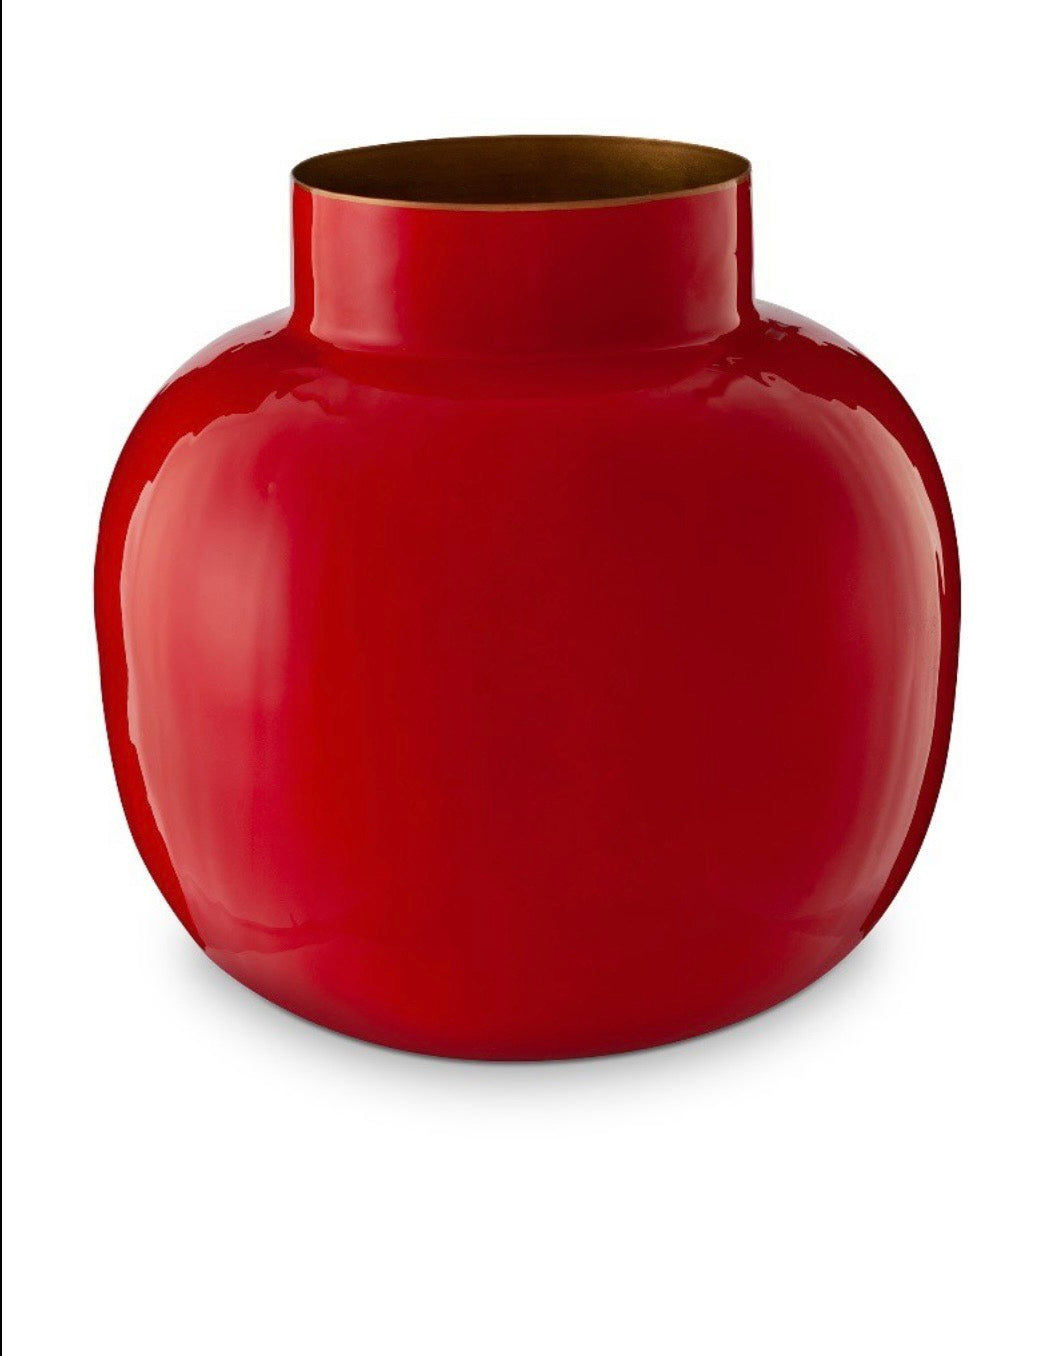 Red lacquered metal vase